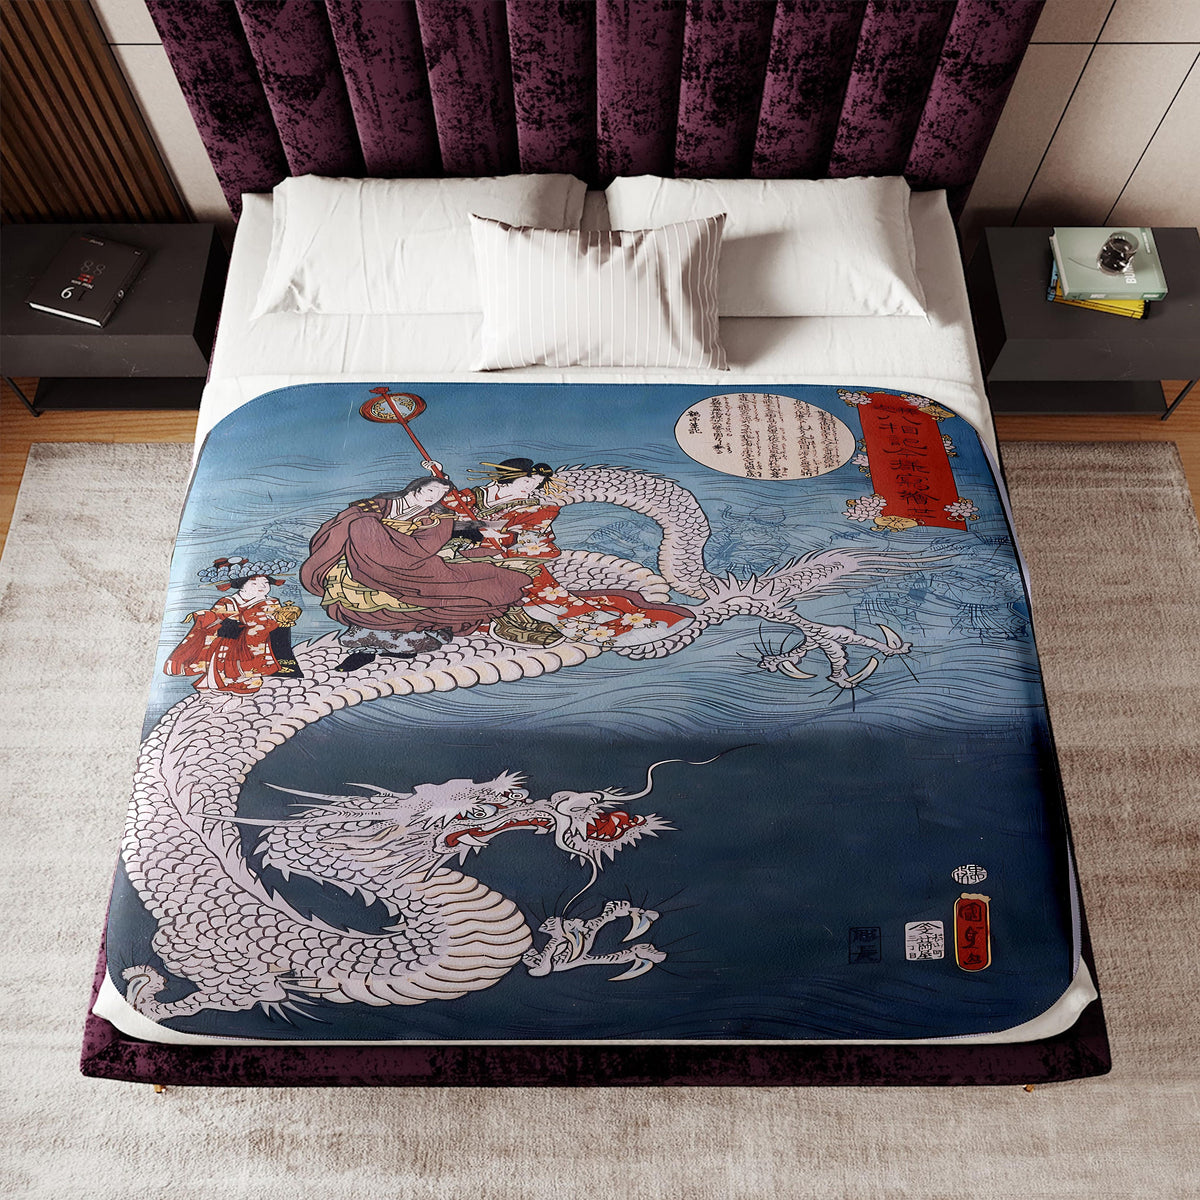 a bed with a painting of a dragon on it